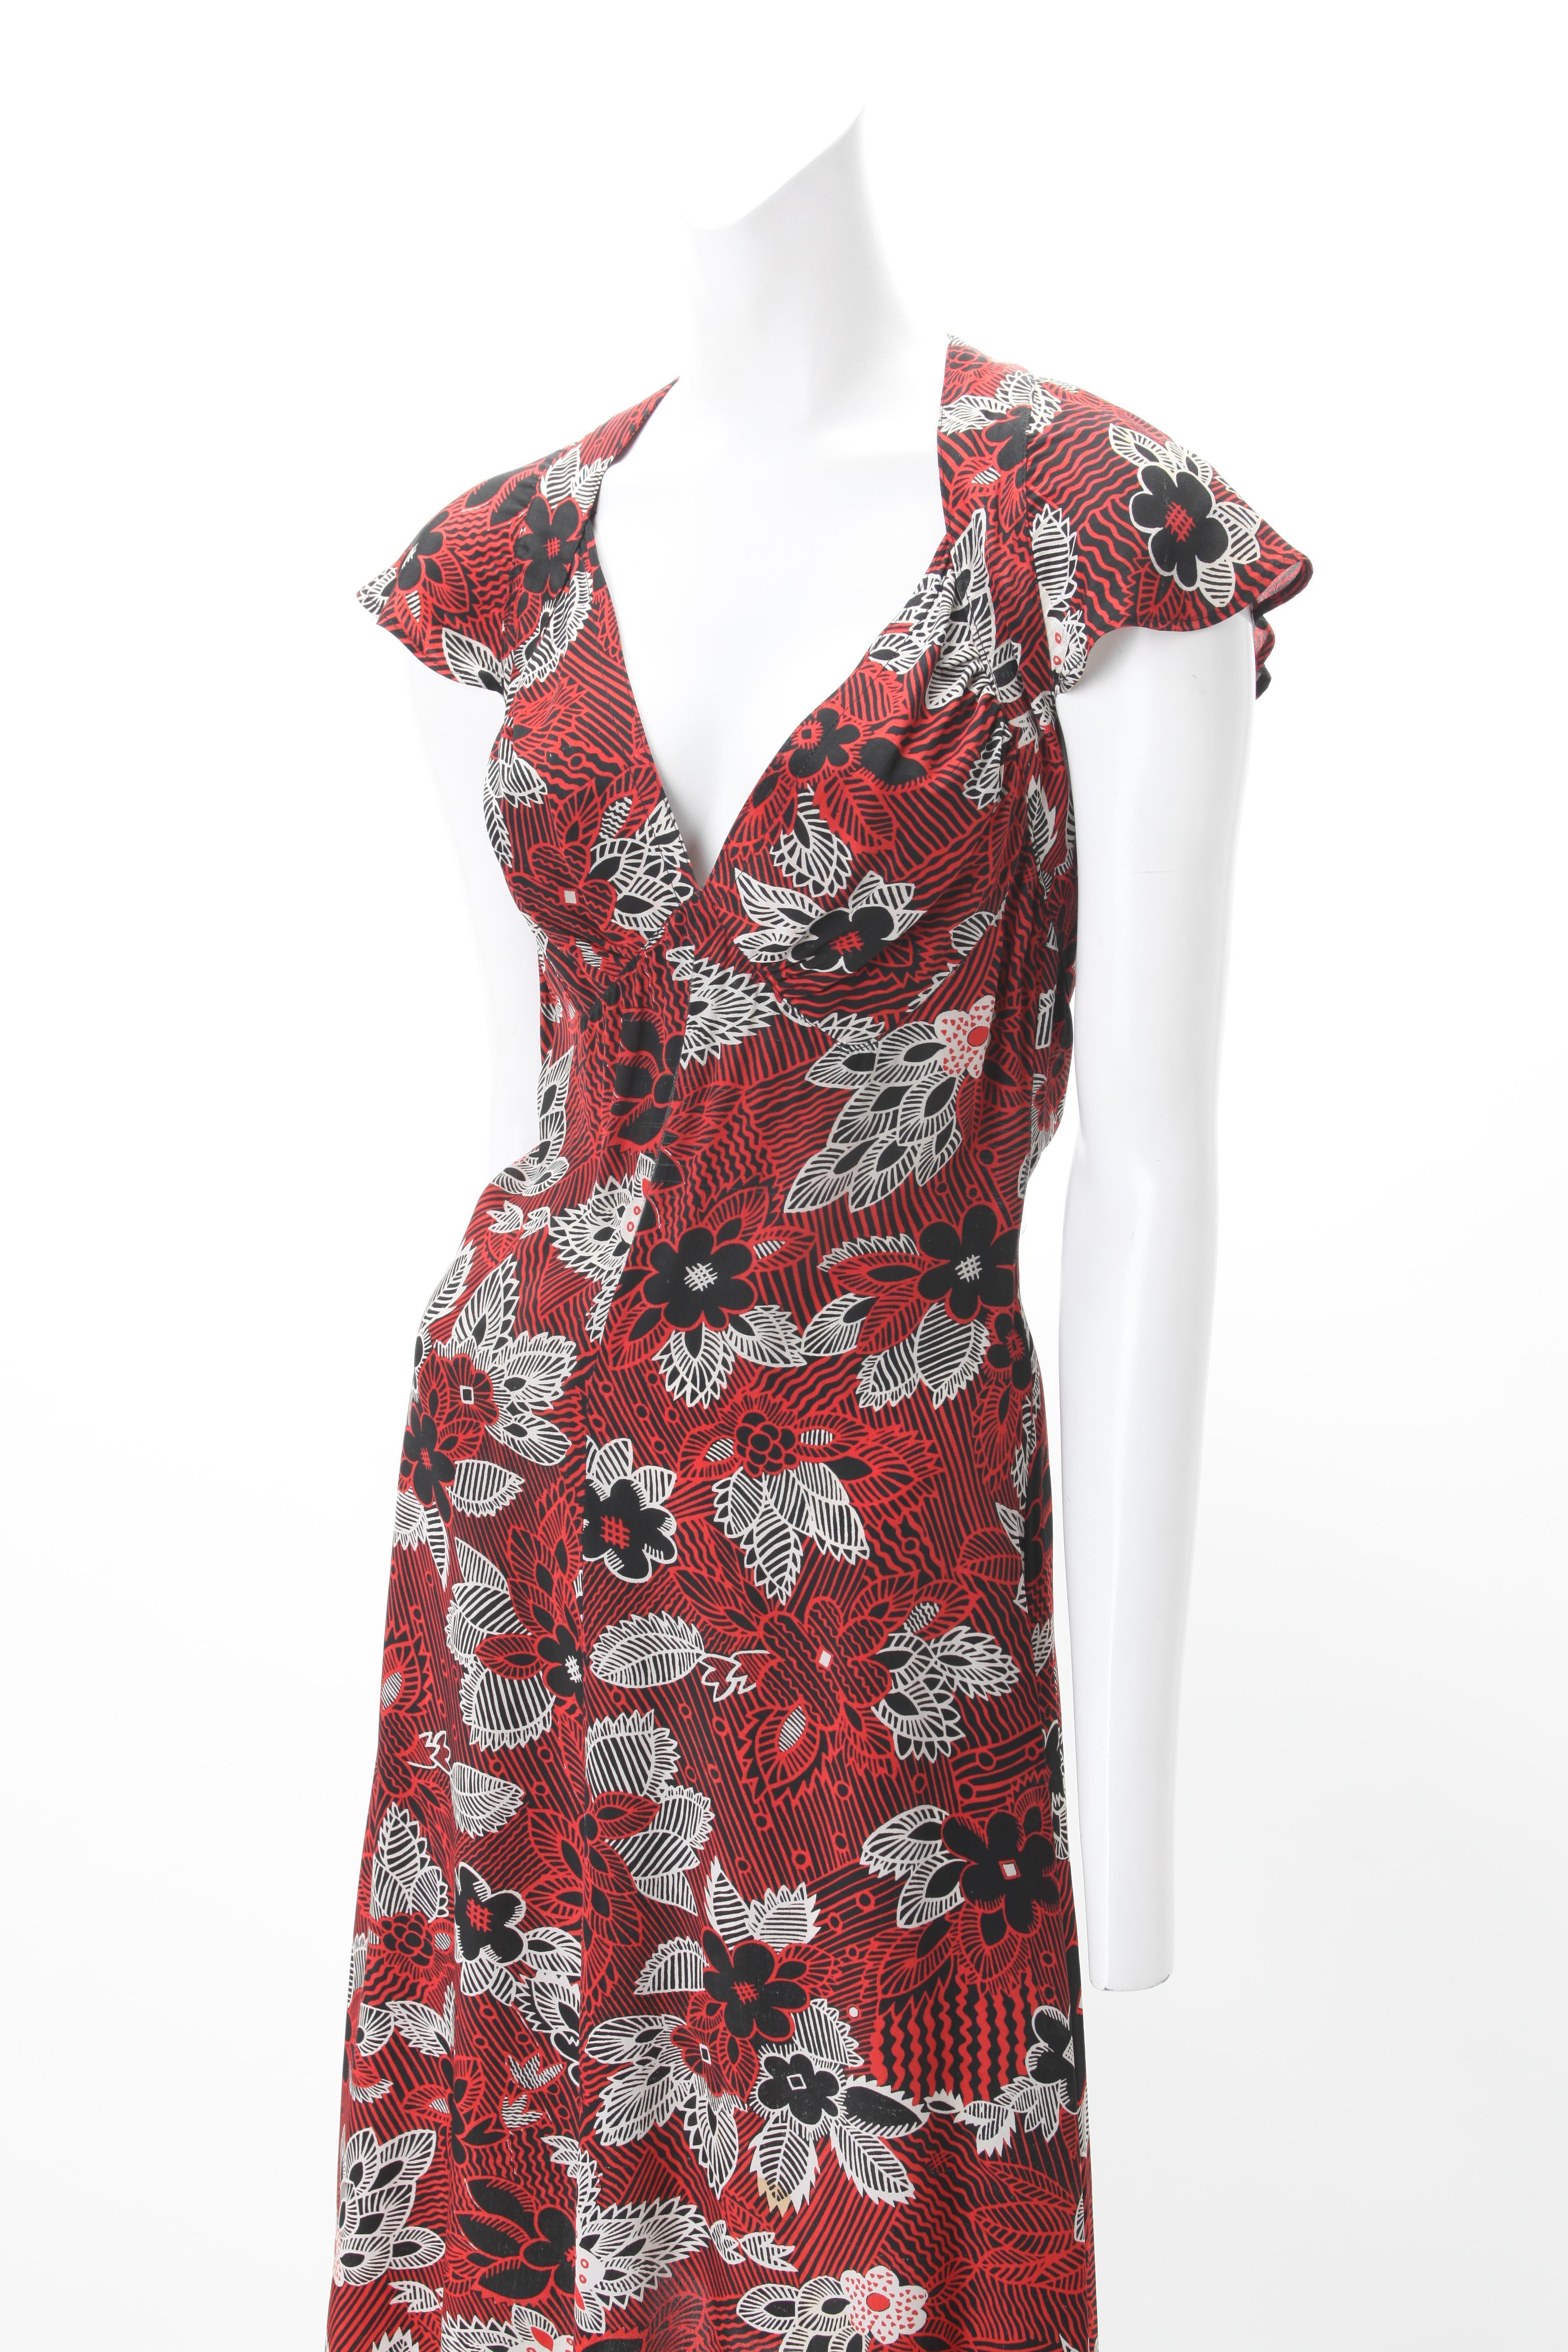 Ossie Clark Celia Birtwell Printed Dress c. 1970s Worn by Julia Roberts in 1997 Conspiracy Theory; Empire dress with self ties at neckline and zipper back; Printed abstract floral motif in red, black and white.